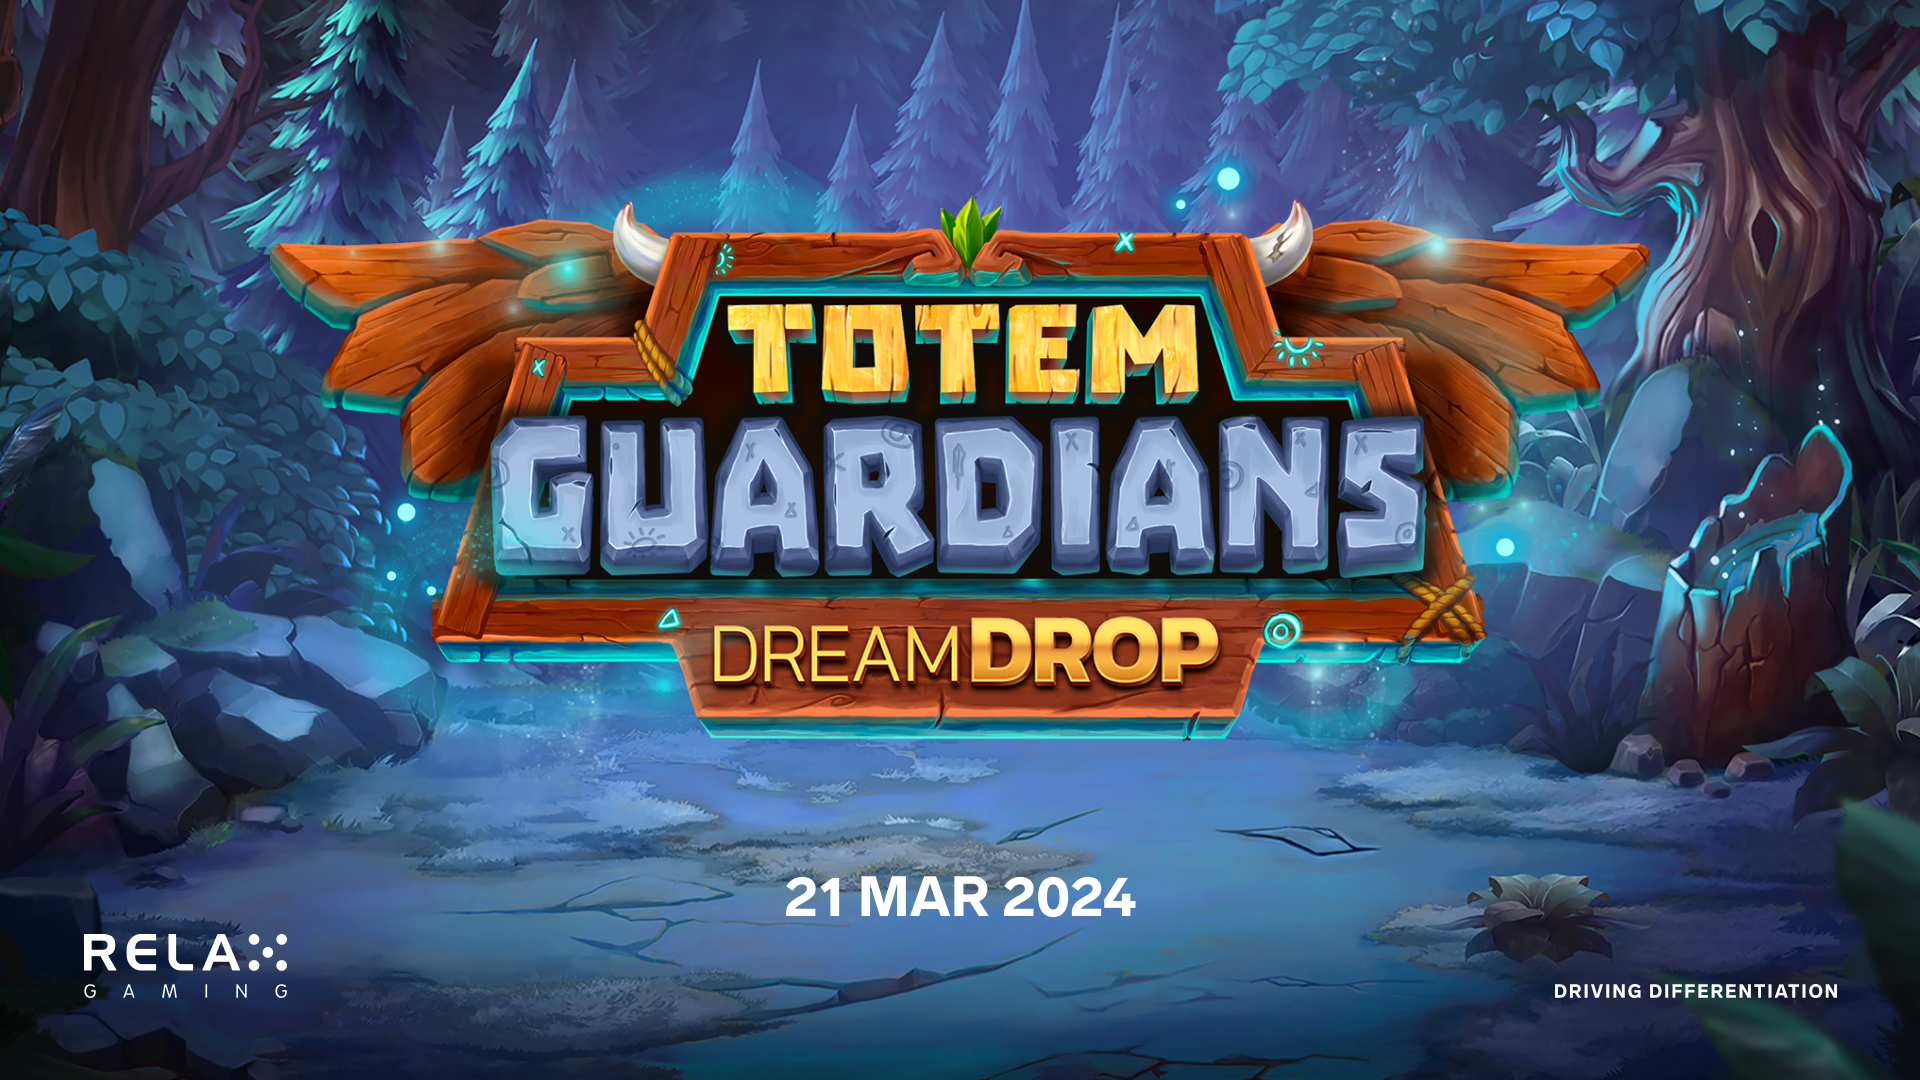 Relax Gaming’s latest title journeys to the heart of the forest in Totem Guardians Dream Drop